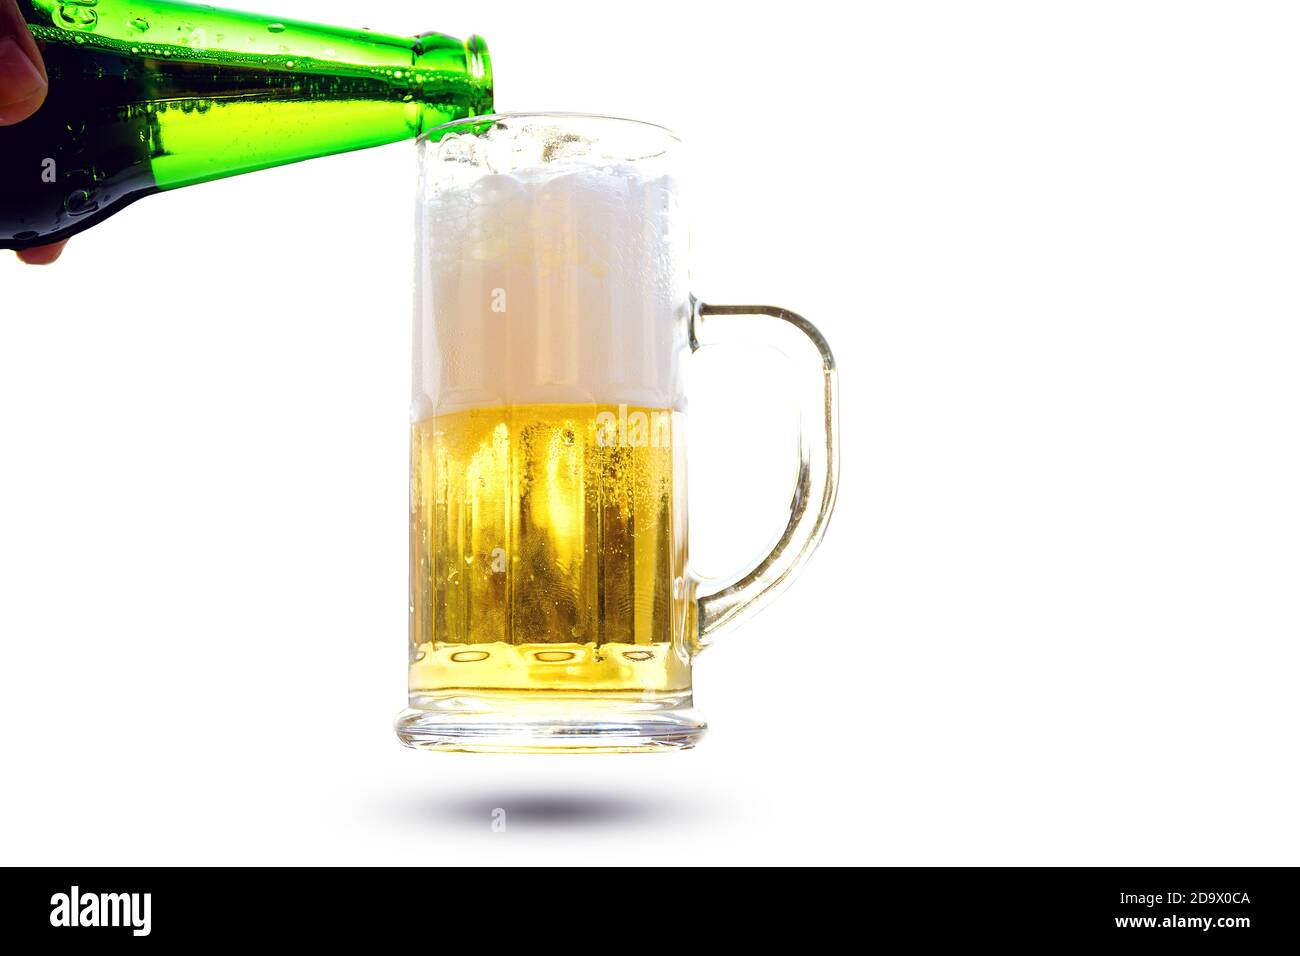 Pour beer from a bottle into a glass with a handle isolated on white background. Stock Photo